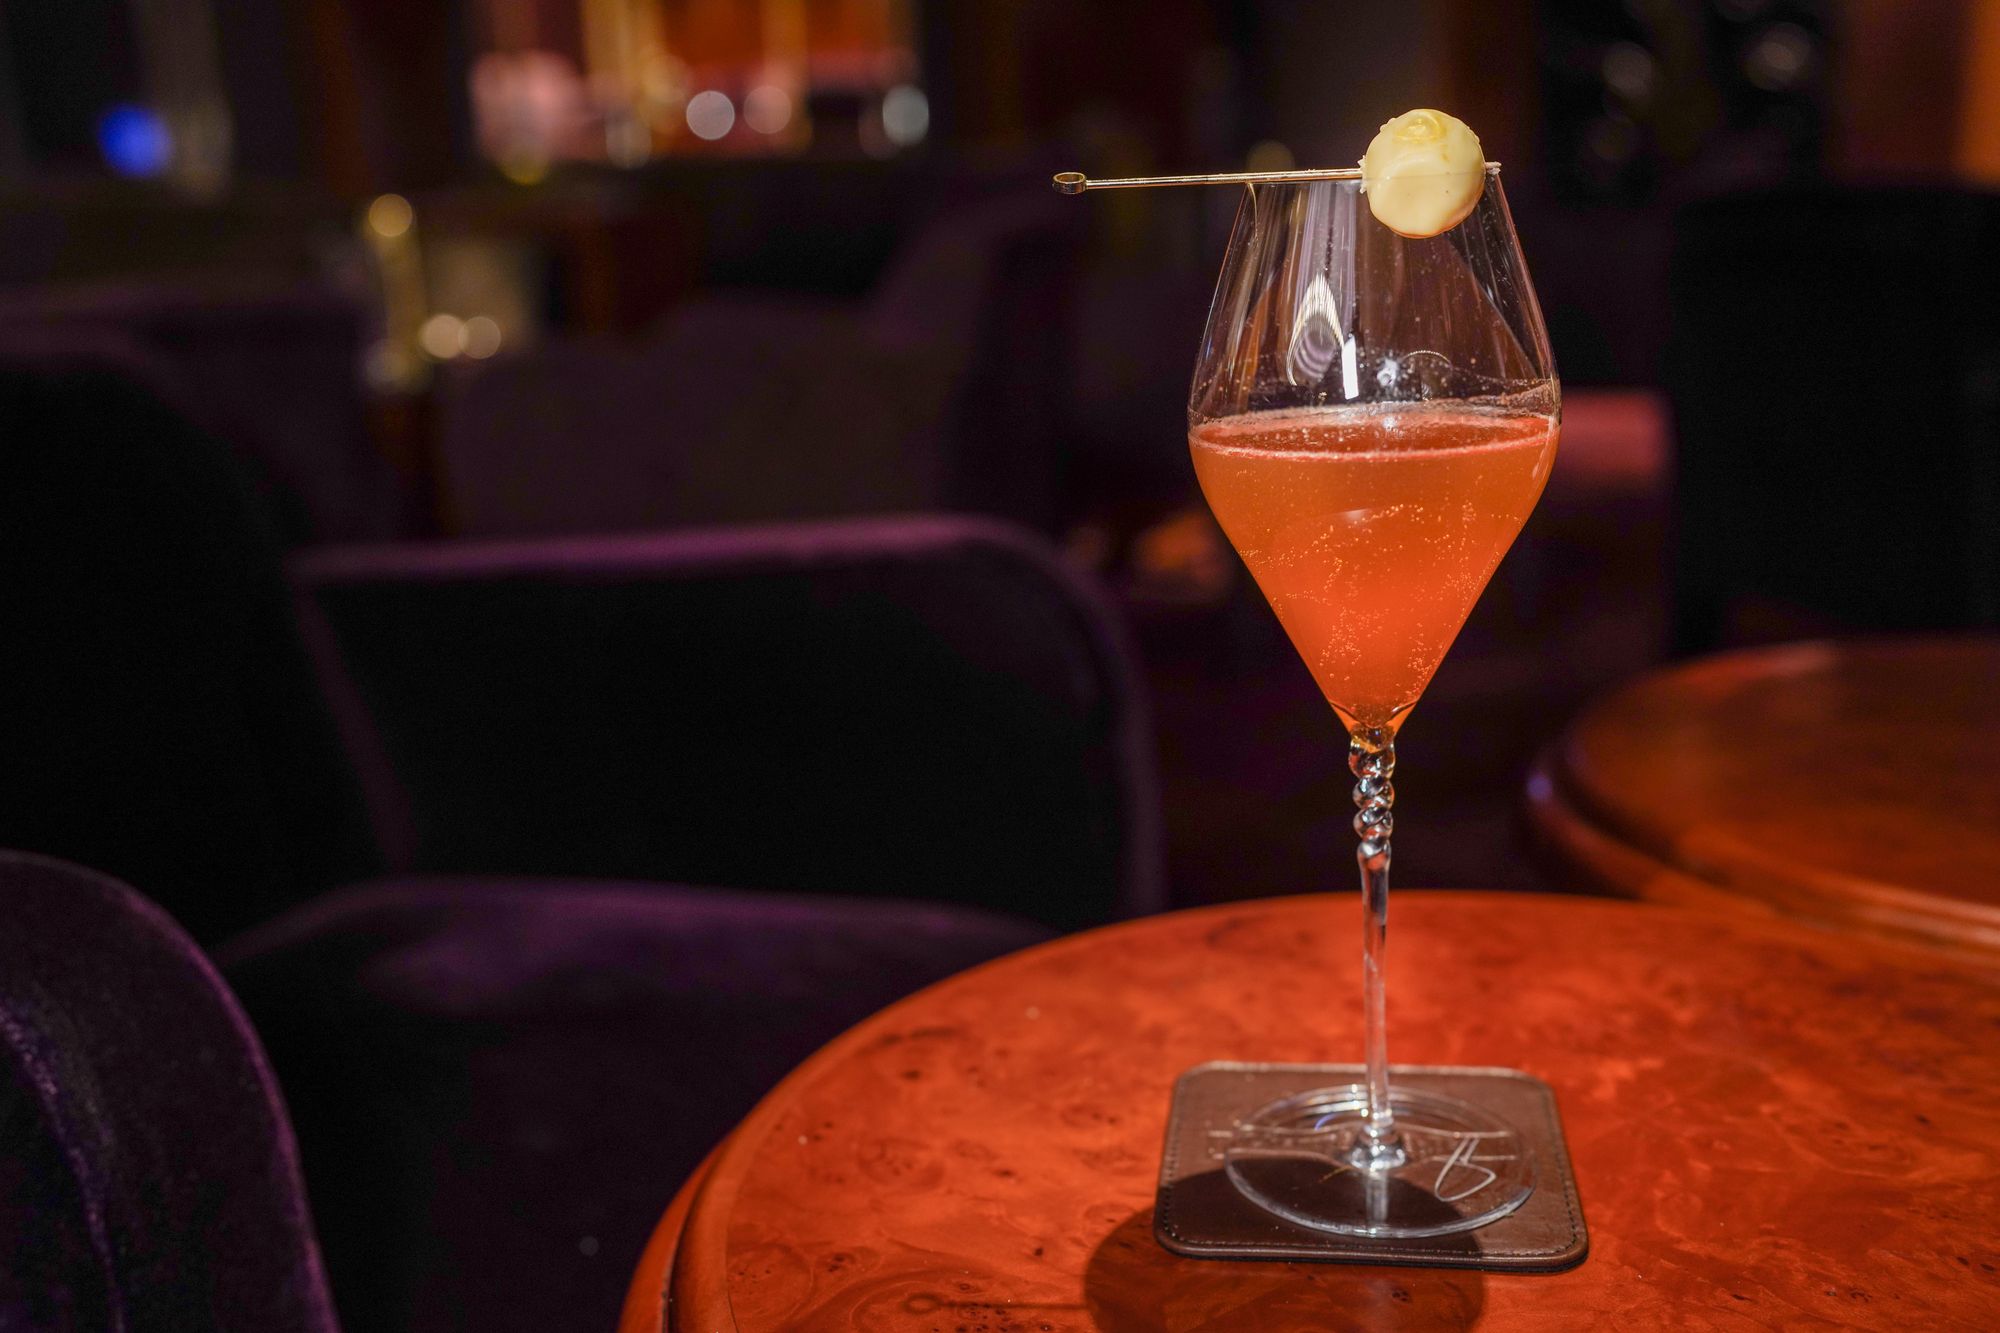 Champagne Bar Returns as New Destination for Champagne Lovers with Massive Collection of Bubblies and Champagne-based Cocktails